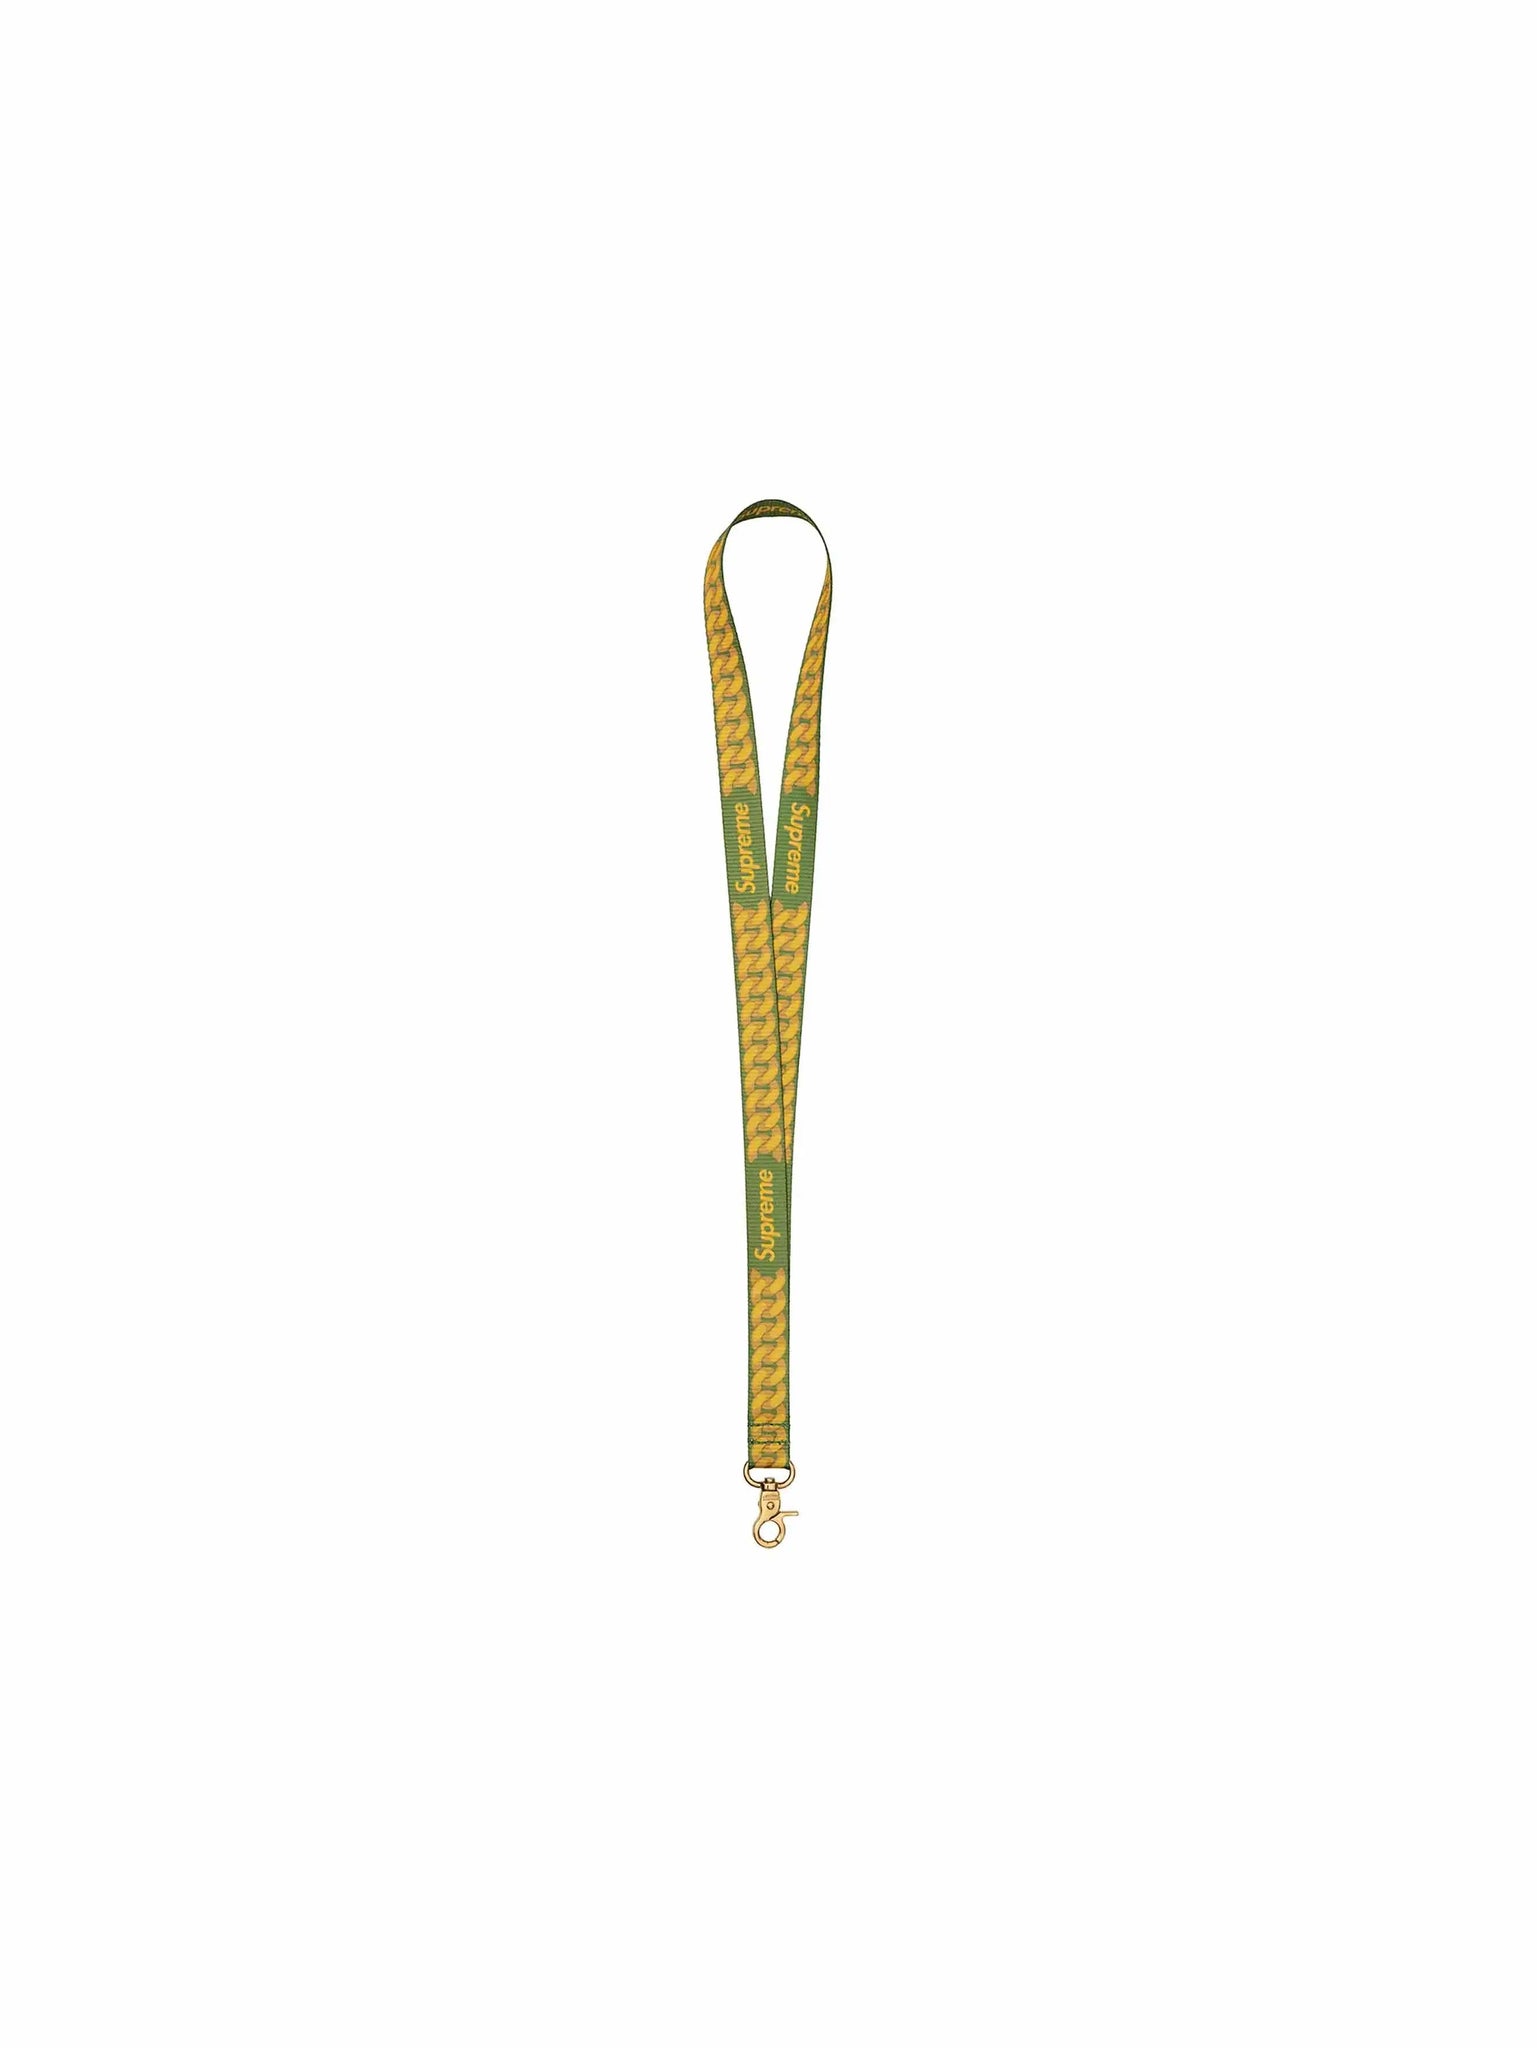 Supreme Cuban Links Lanyard Green in Auckland, New Zealand - Shop name